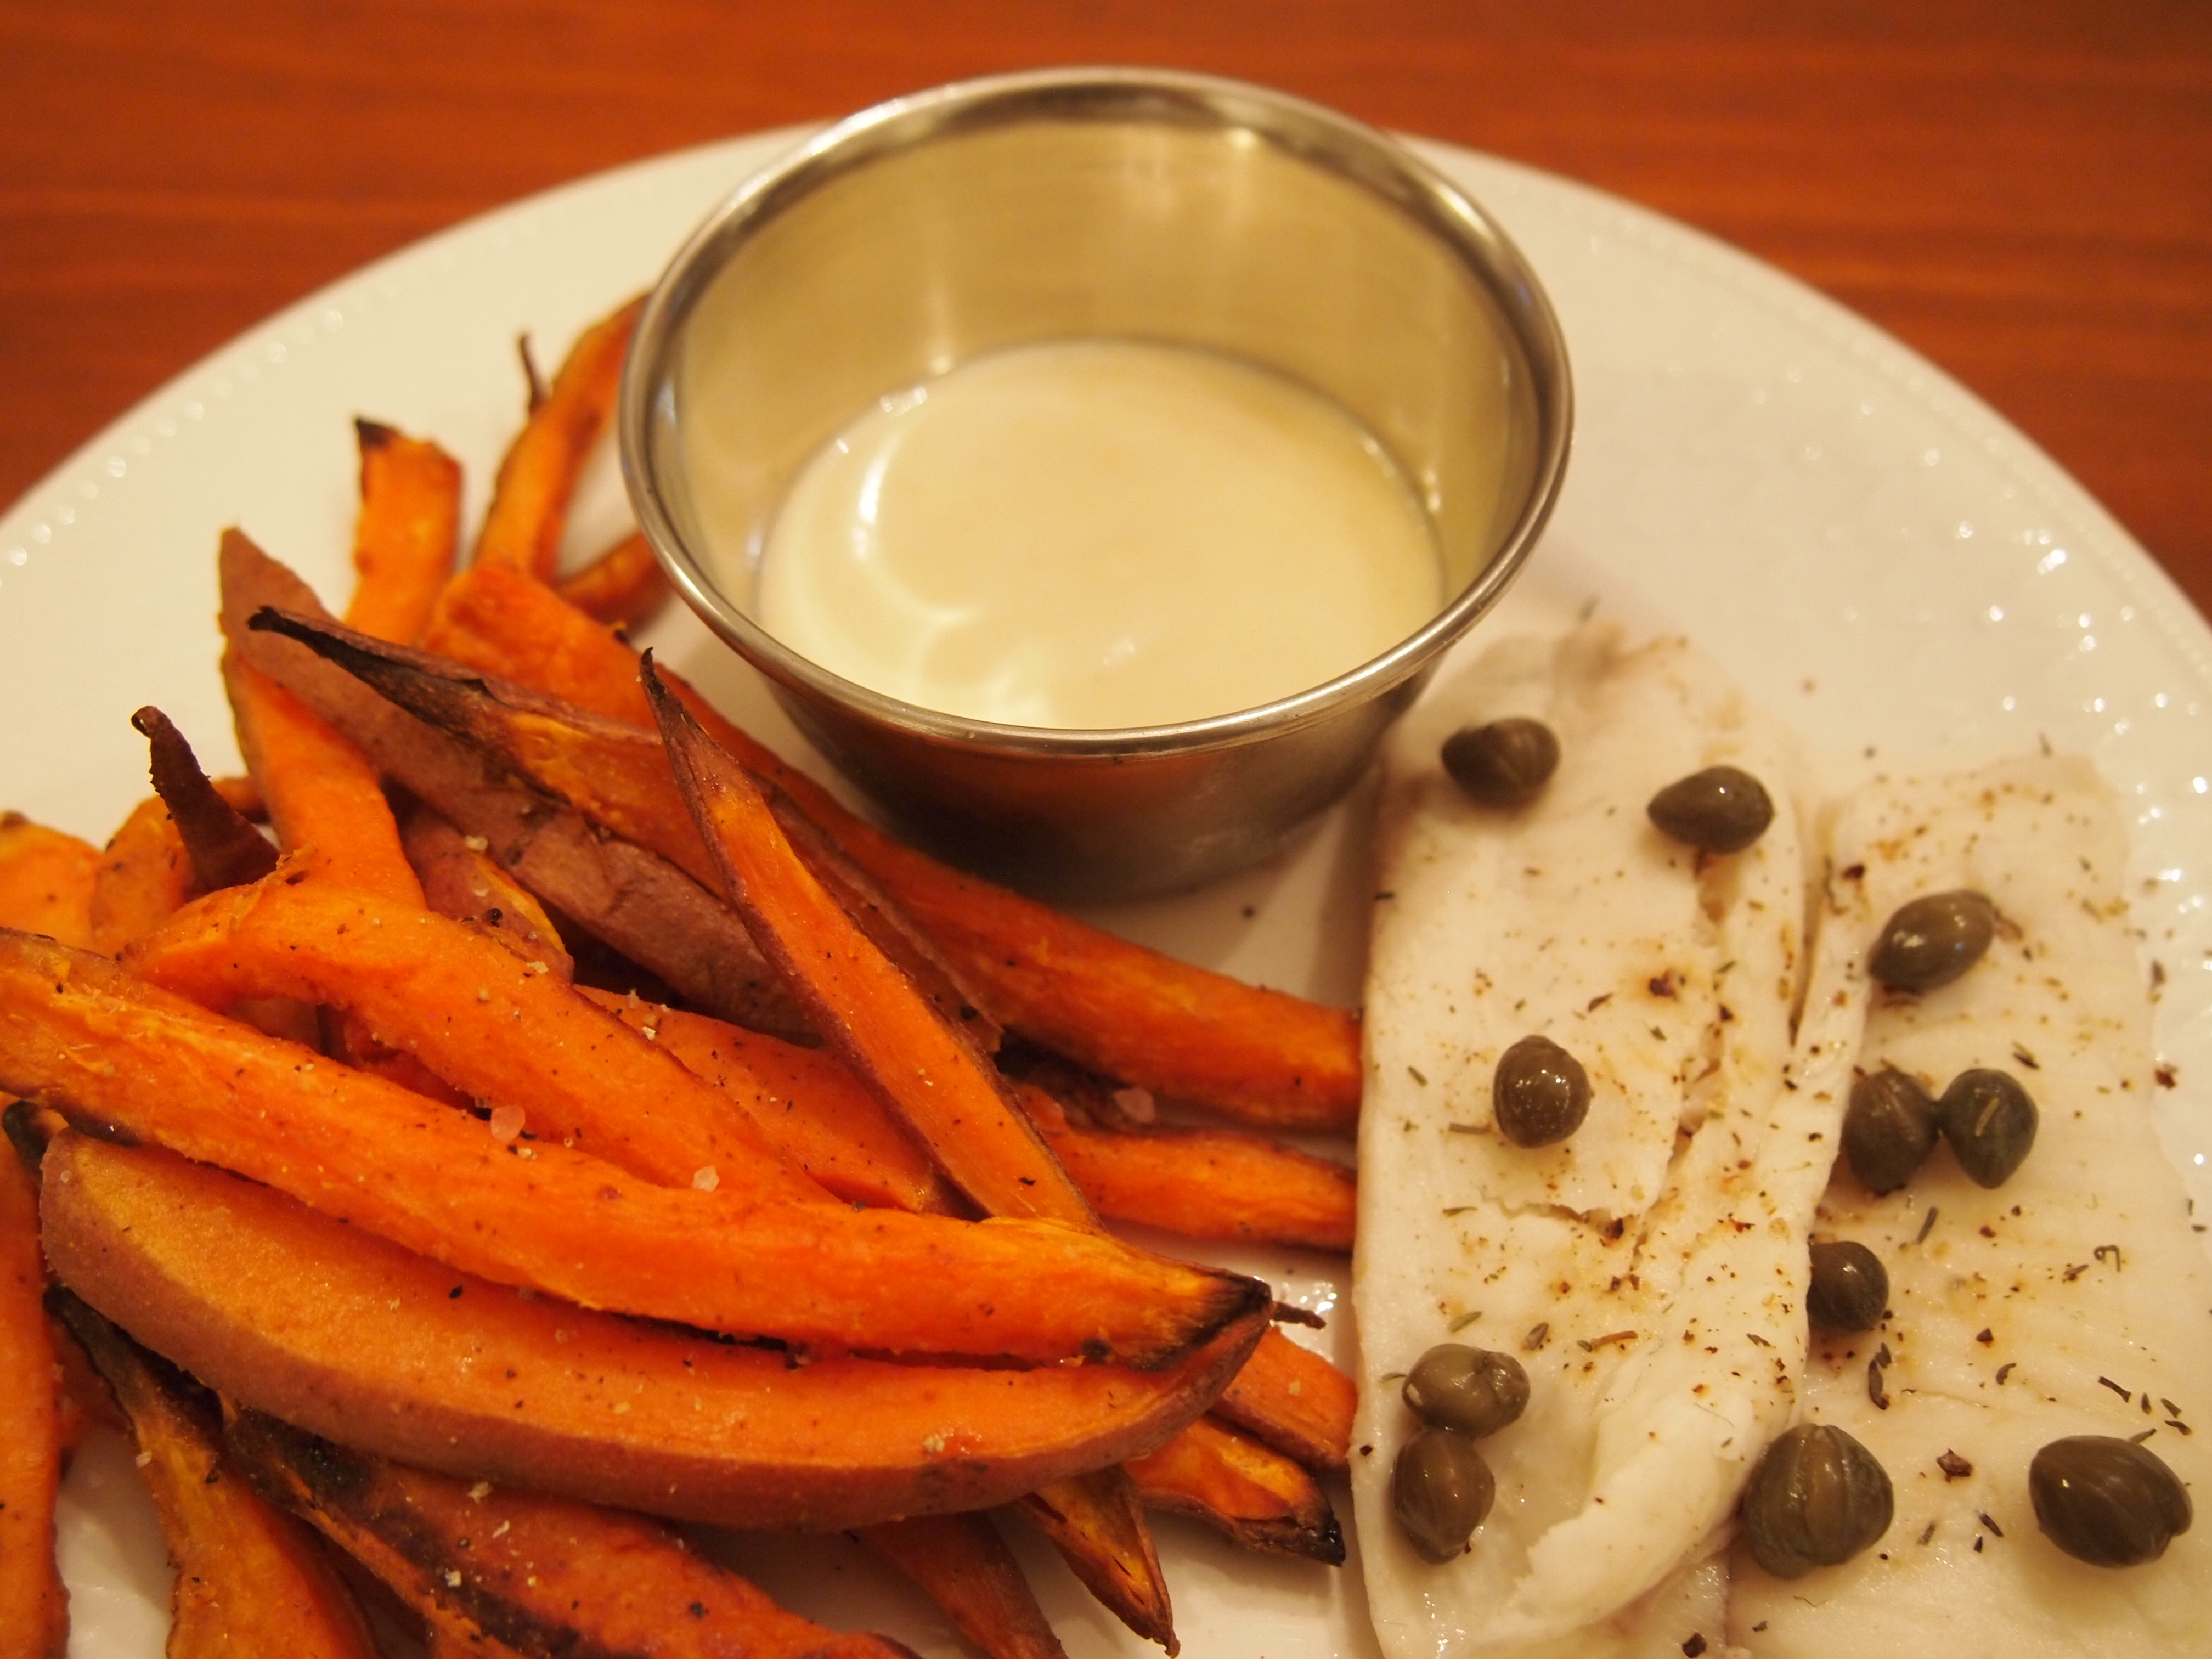 Generation Dip with Generation Sweet Potato Fries and Fish with Cappers